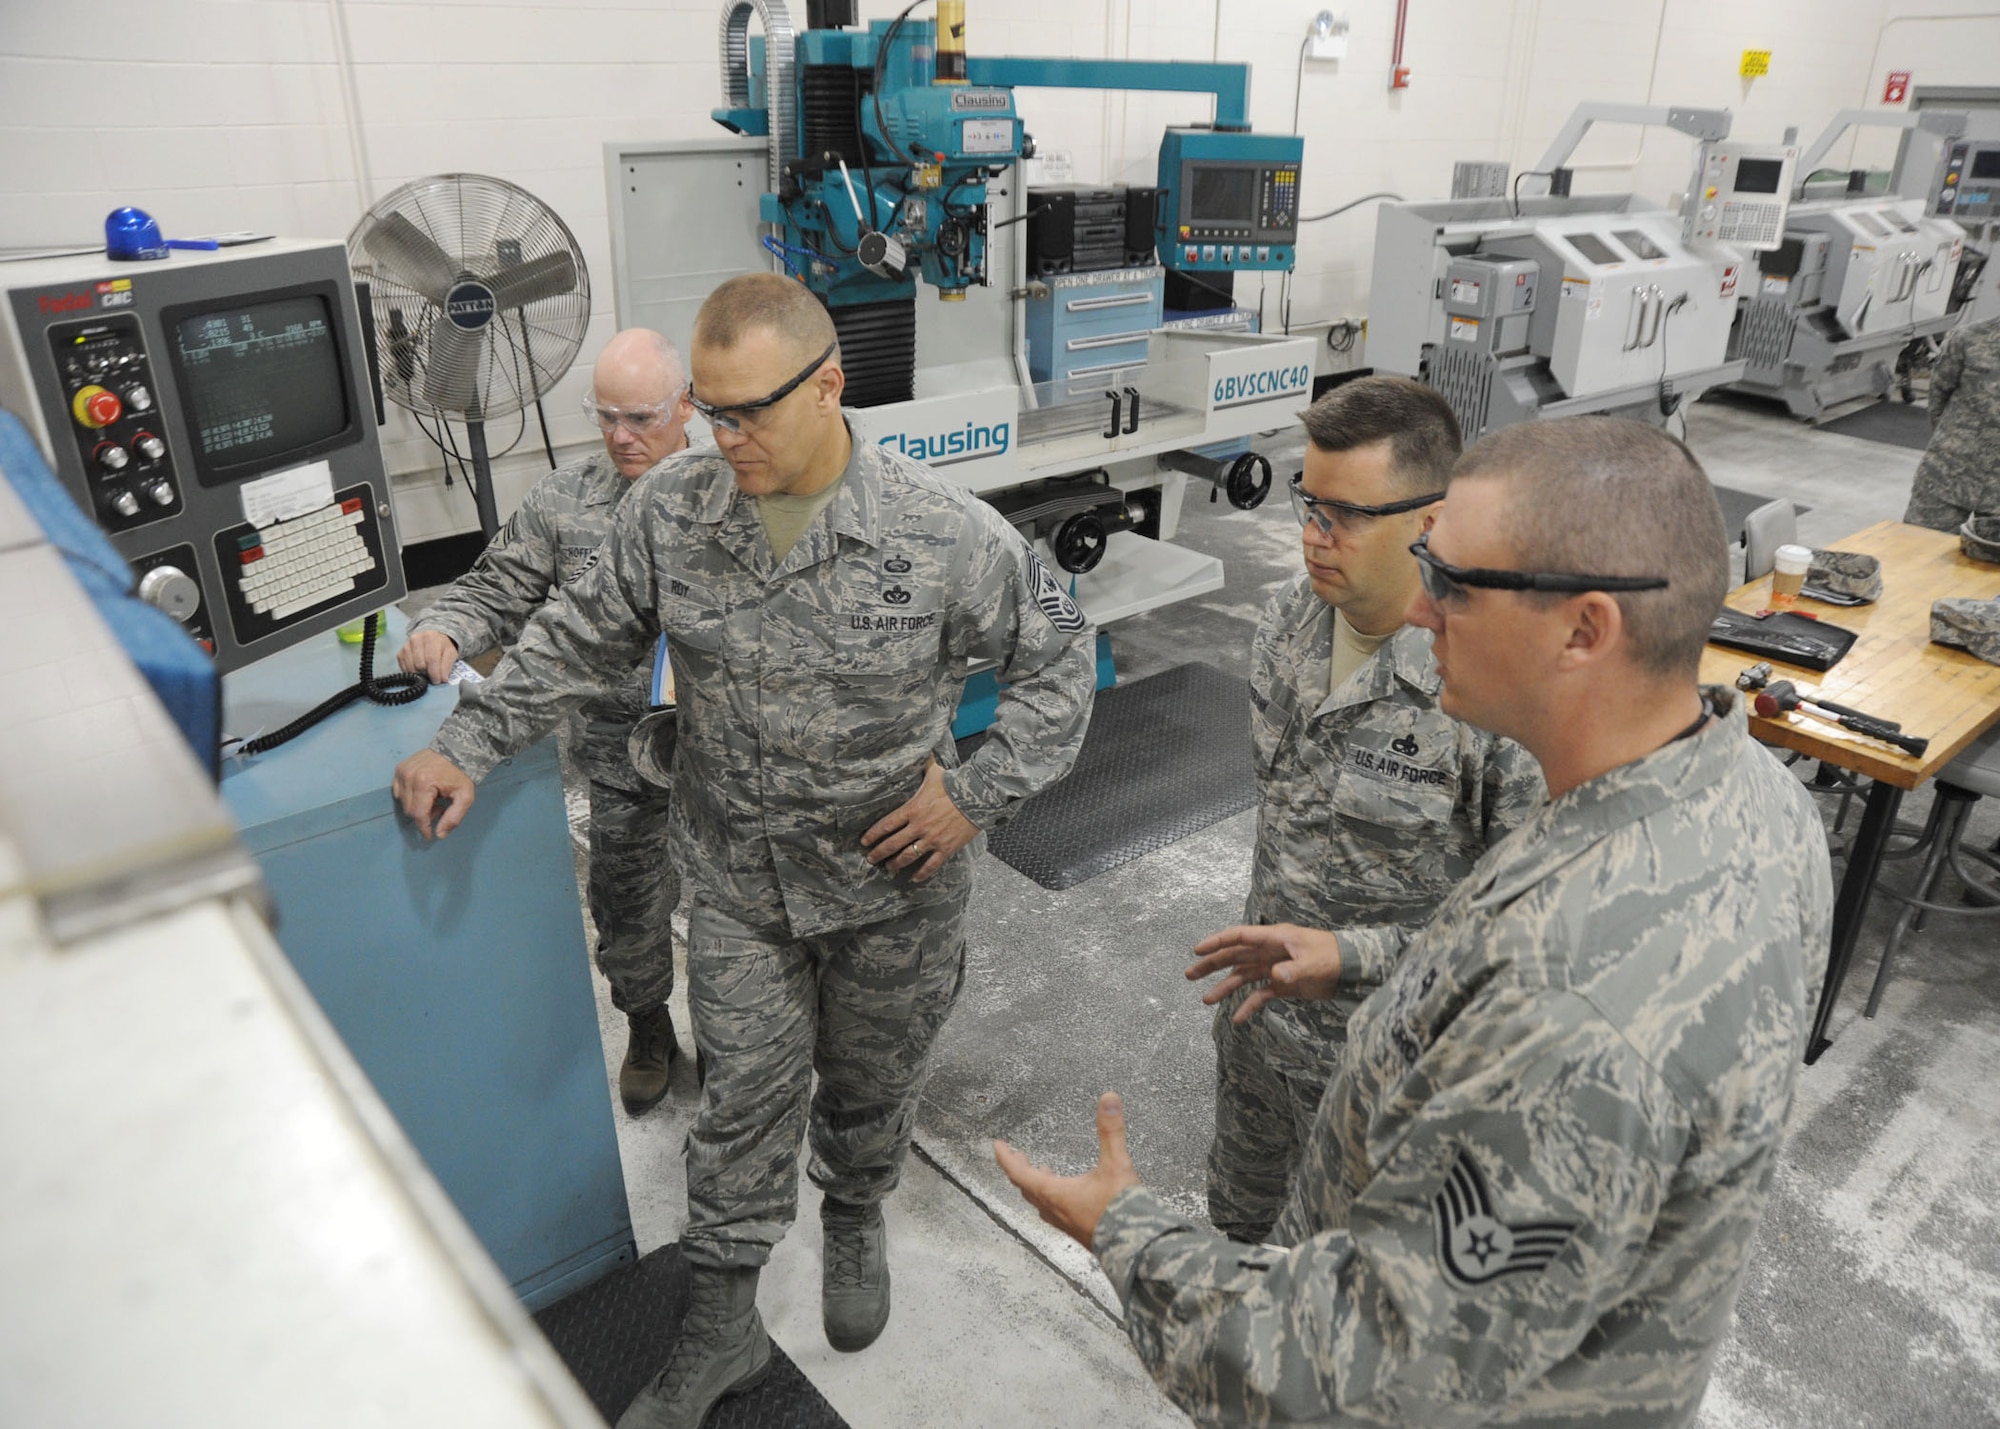 Chief Master Sgt. of the Air Force James A. Roy watches as Staff Sgt. Michael Foster demonstrates the part fabrication capabilities of the 445th Airlift Wing June 11, 2010, at Wright-Patterson Air Force Base, Ohio. (U.S. Air Force photo/Staff Sgt. Joshua Strang)